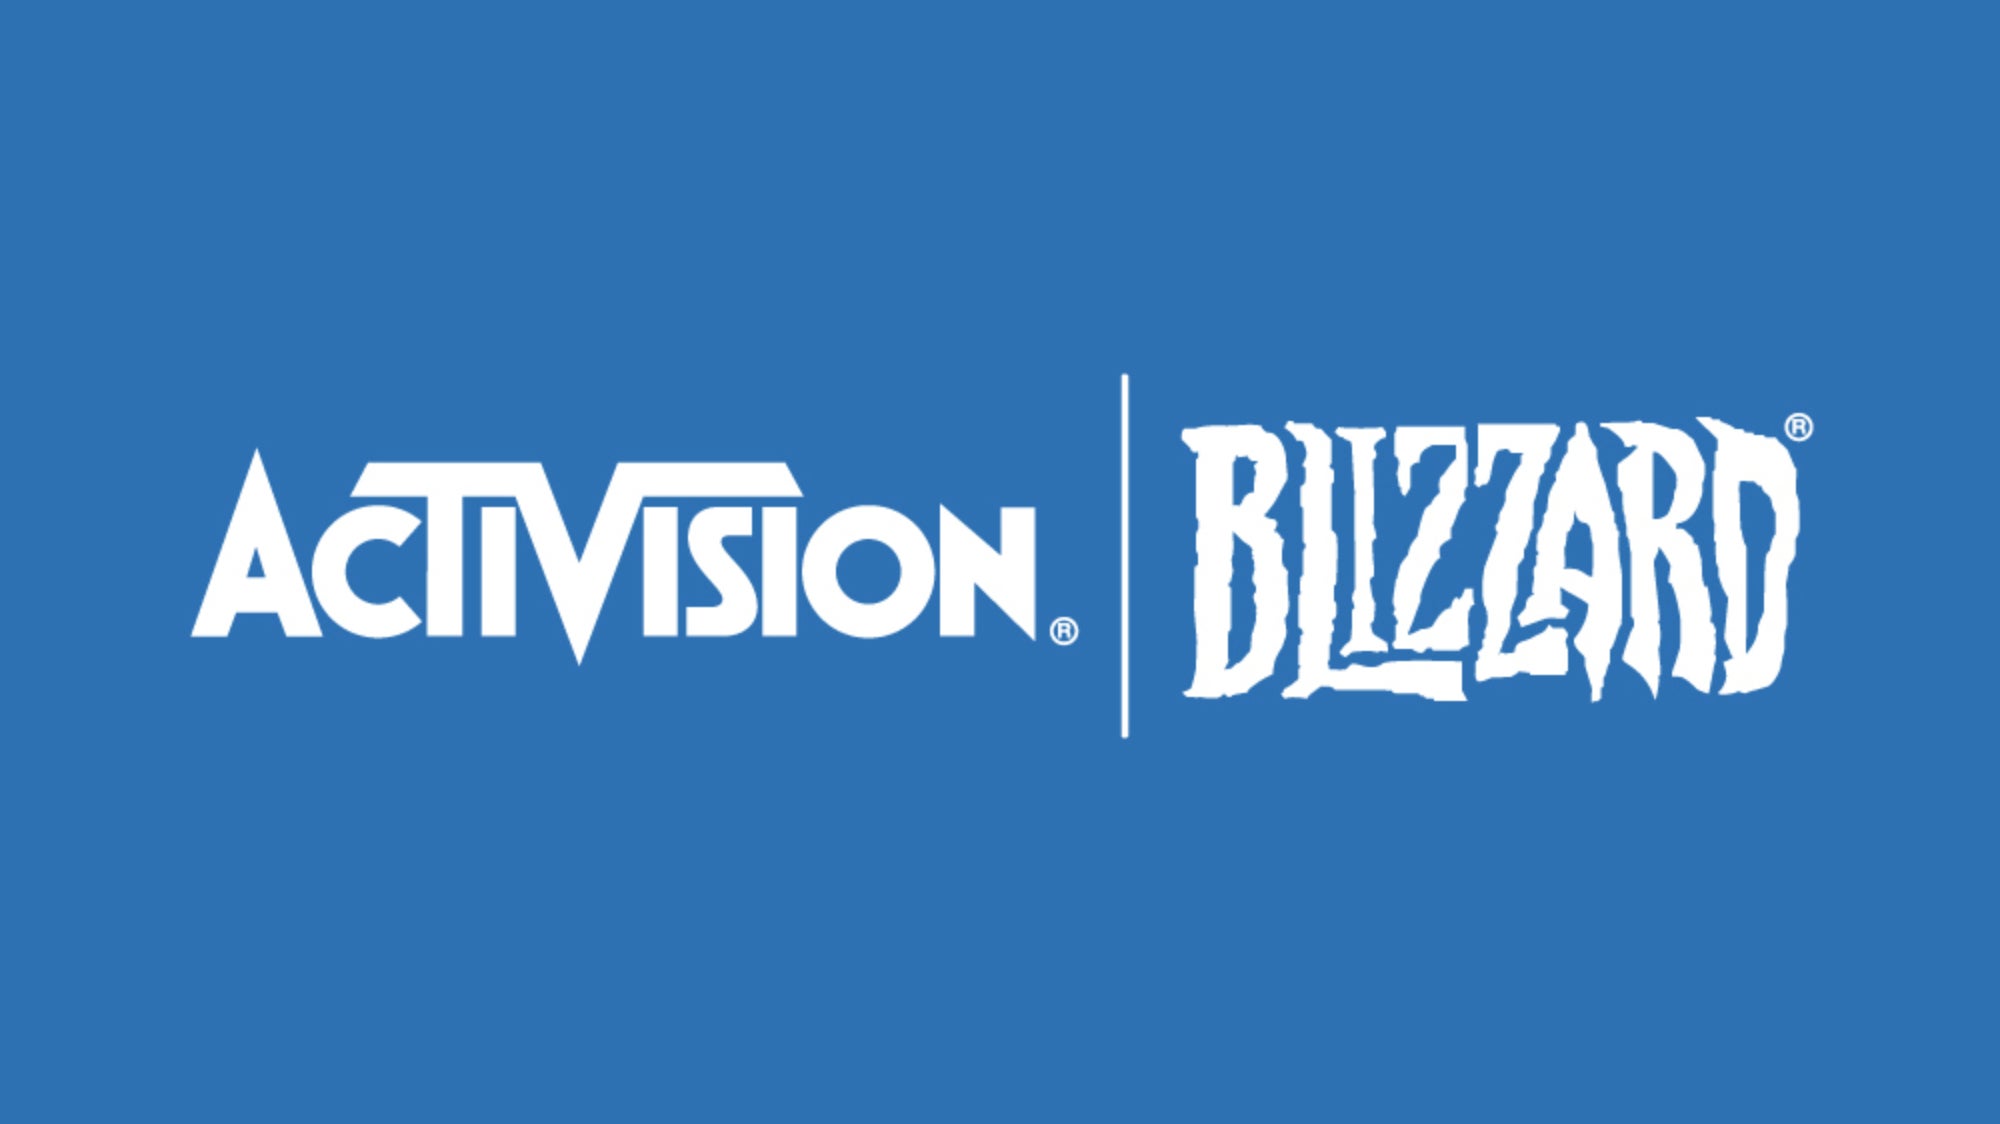 Image for Activision Blizzard shareholders urged not to re-elect board members following "inexcusable passivity"